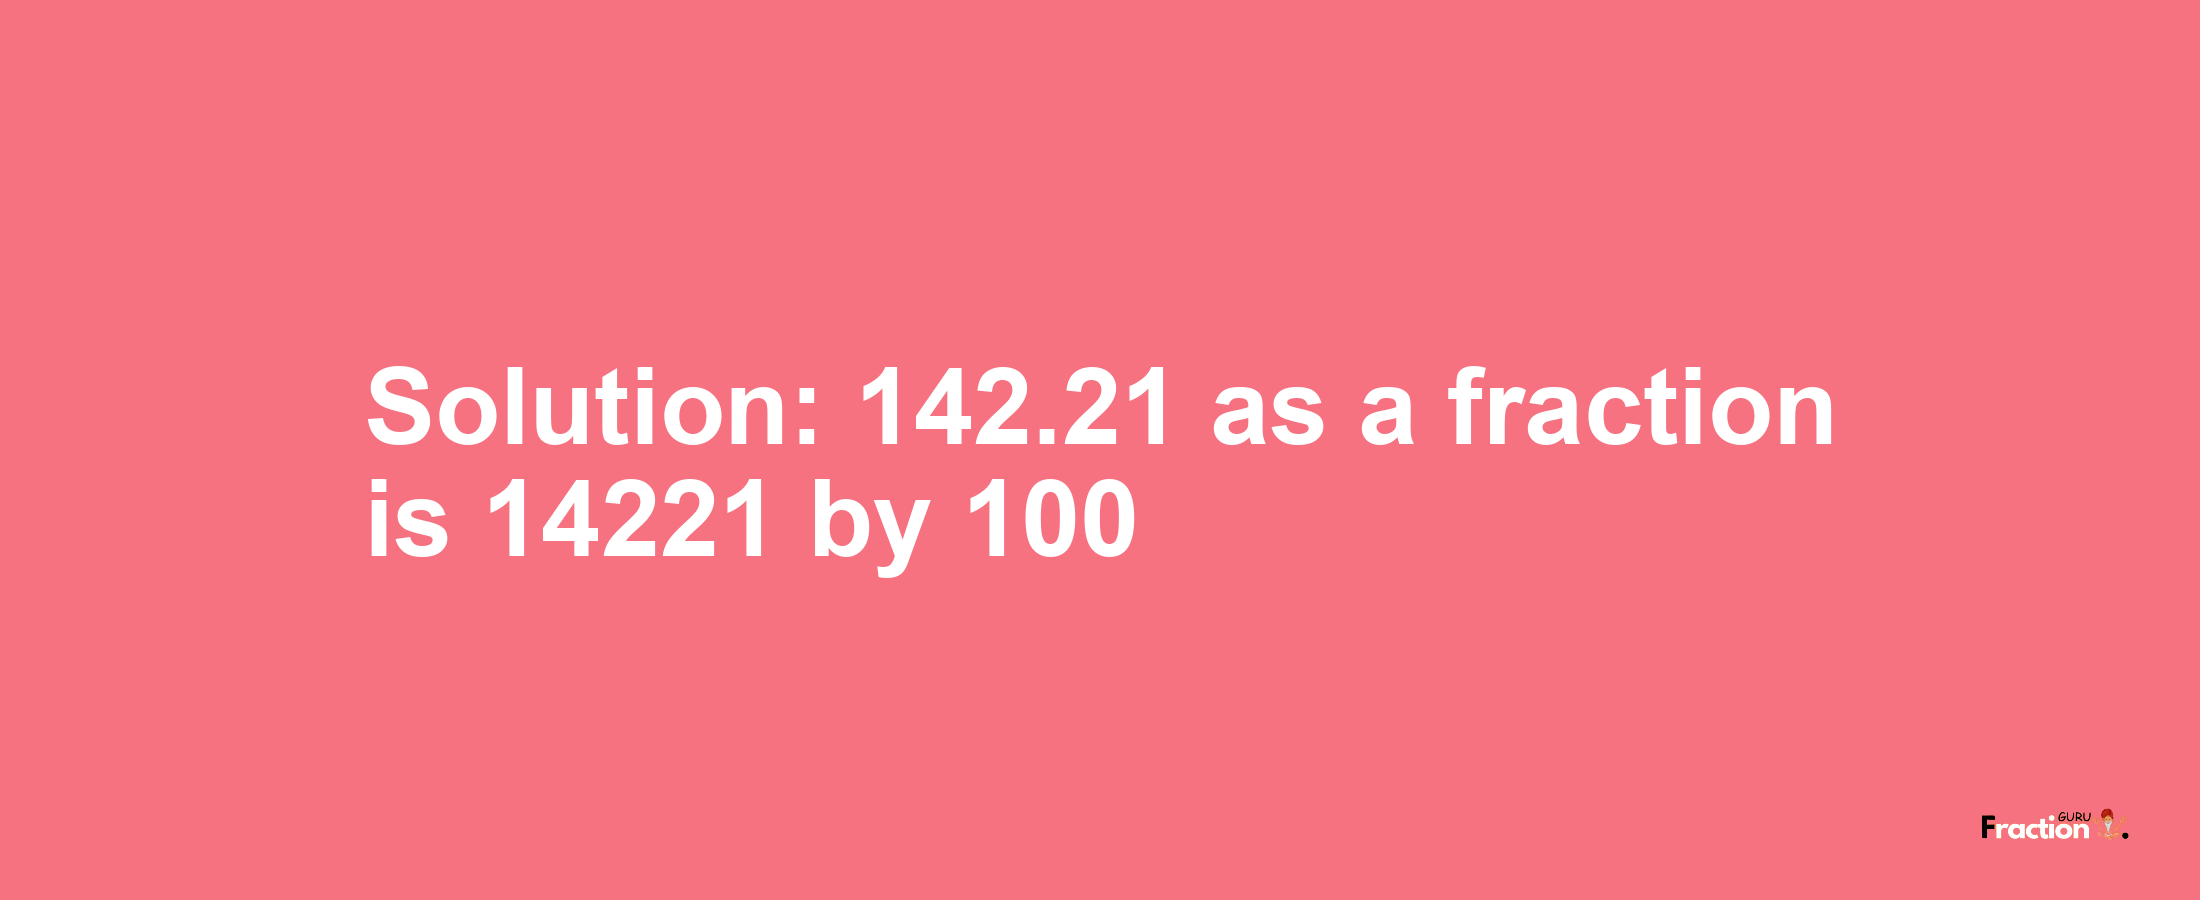 Solution:142.21 as a fraction is 14221/100